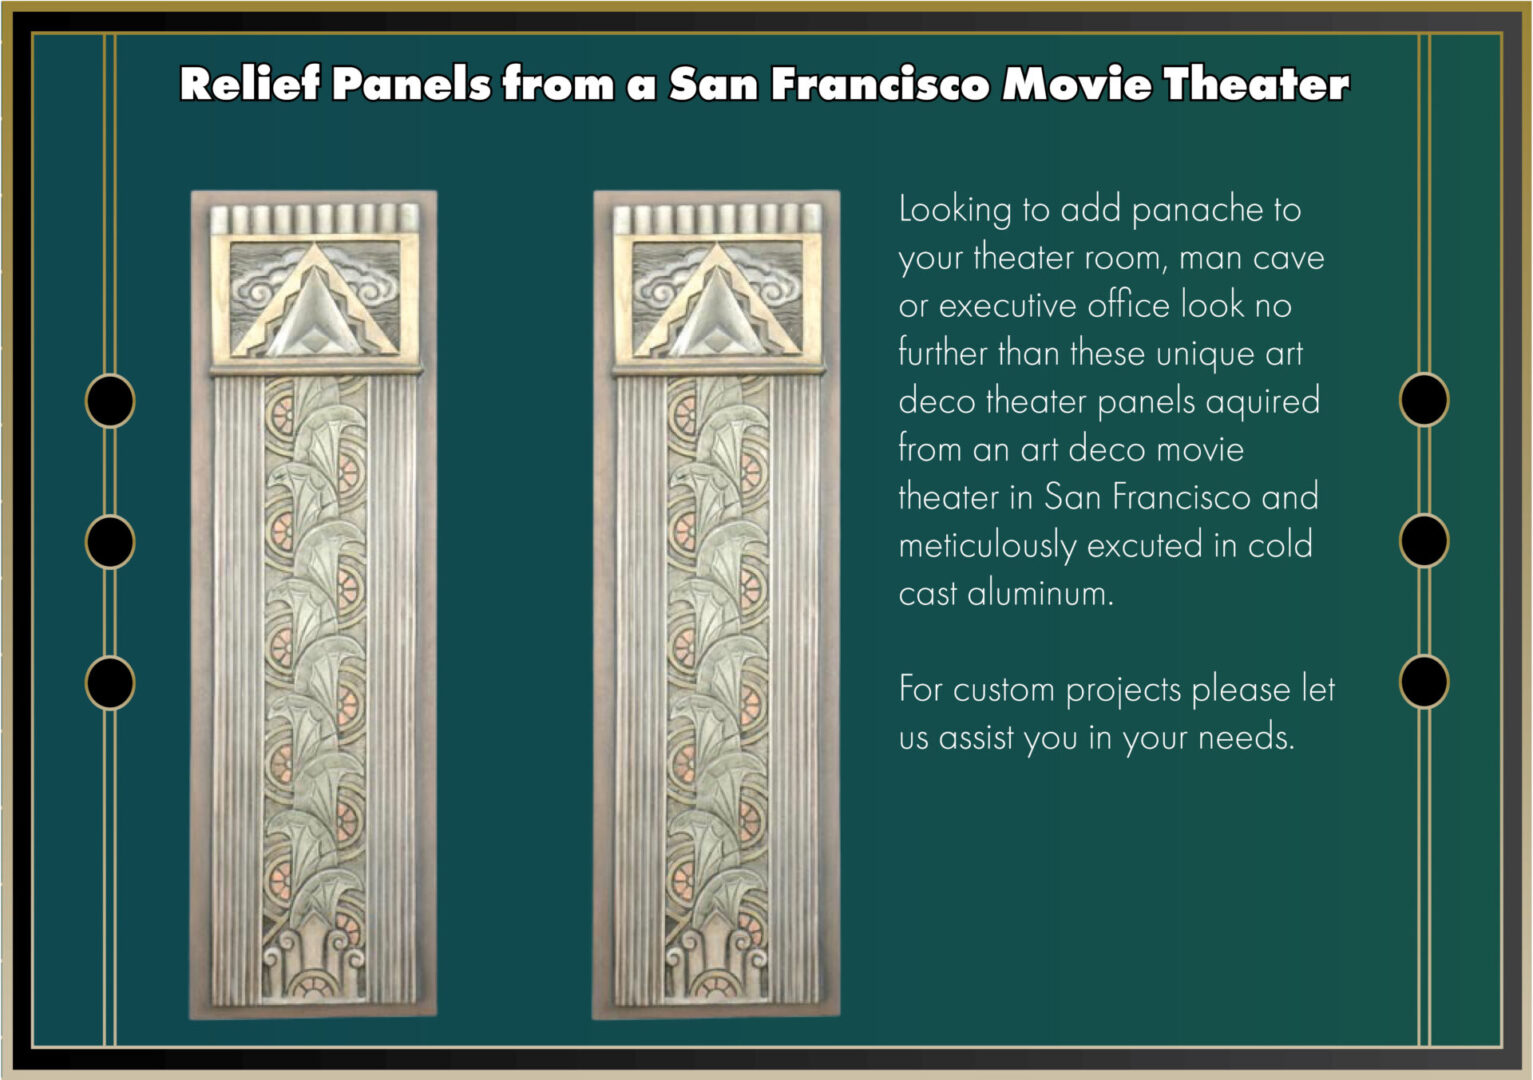 Relief Panels from a San Francisco Movie Theater